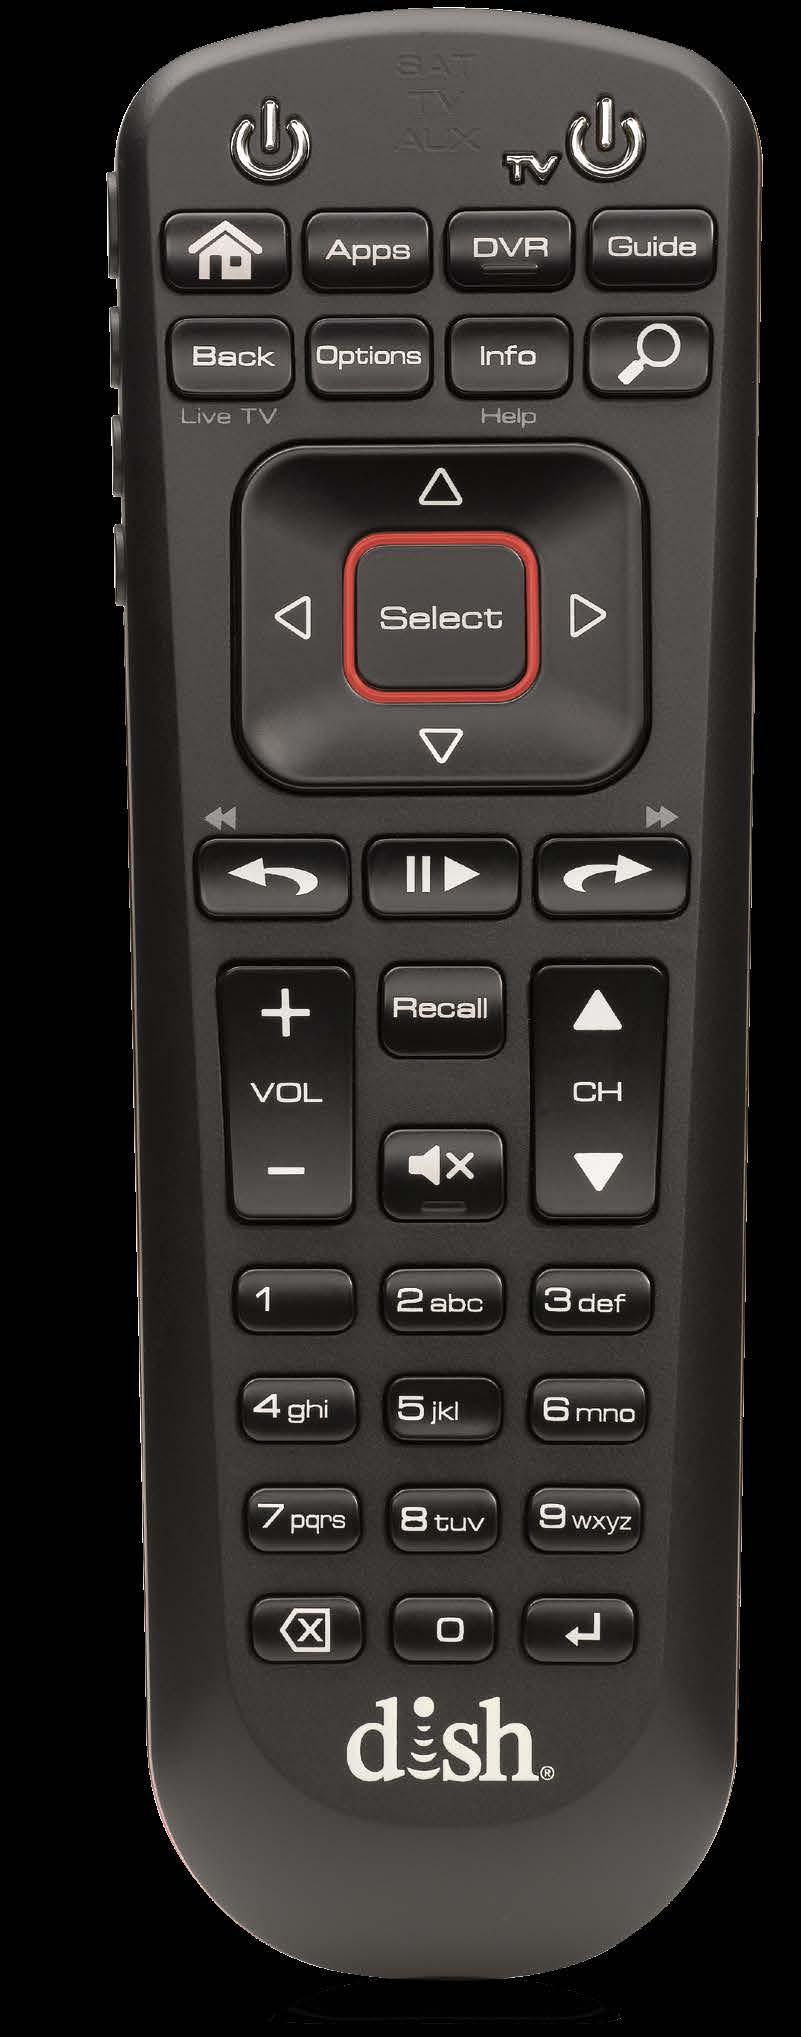 REMOTE OVERVIEW The Hopper remote control makes it easy for you to watch, search, and record programming. Here s a quick overview of the basics to get you started.